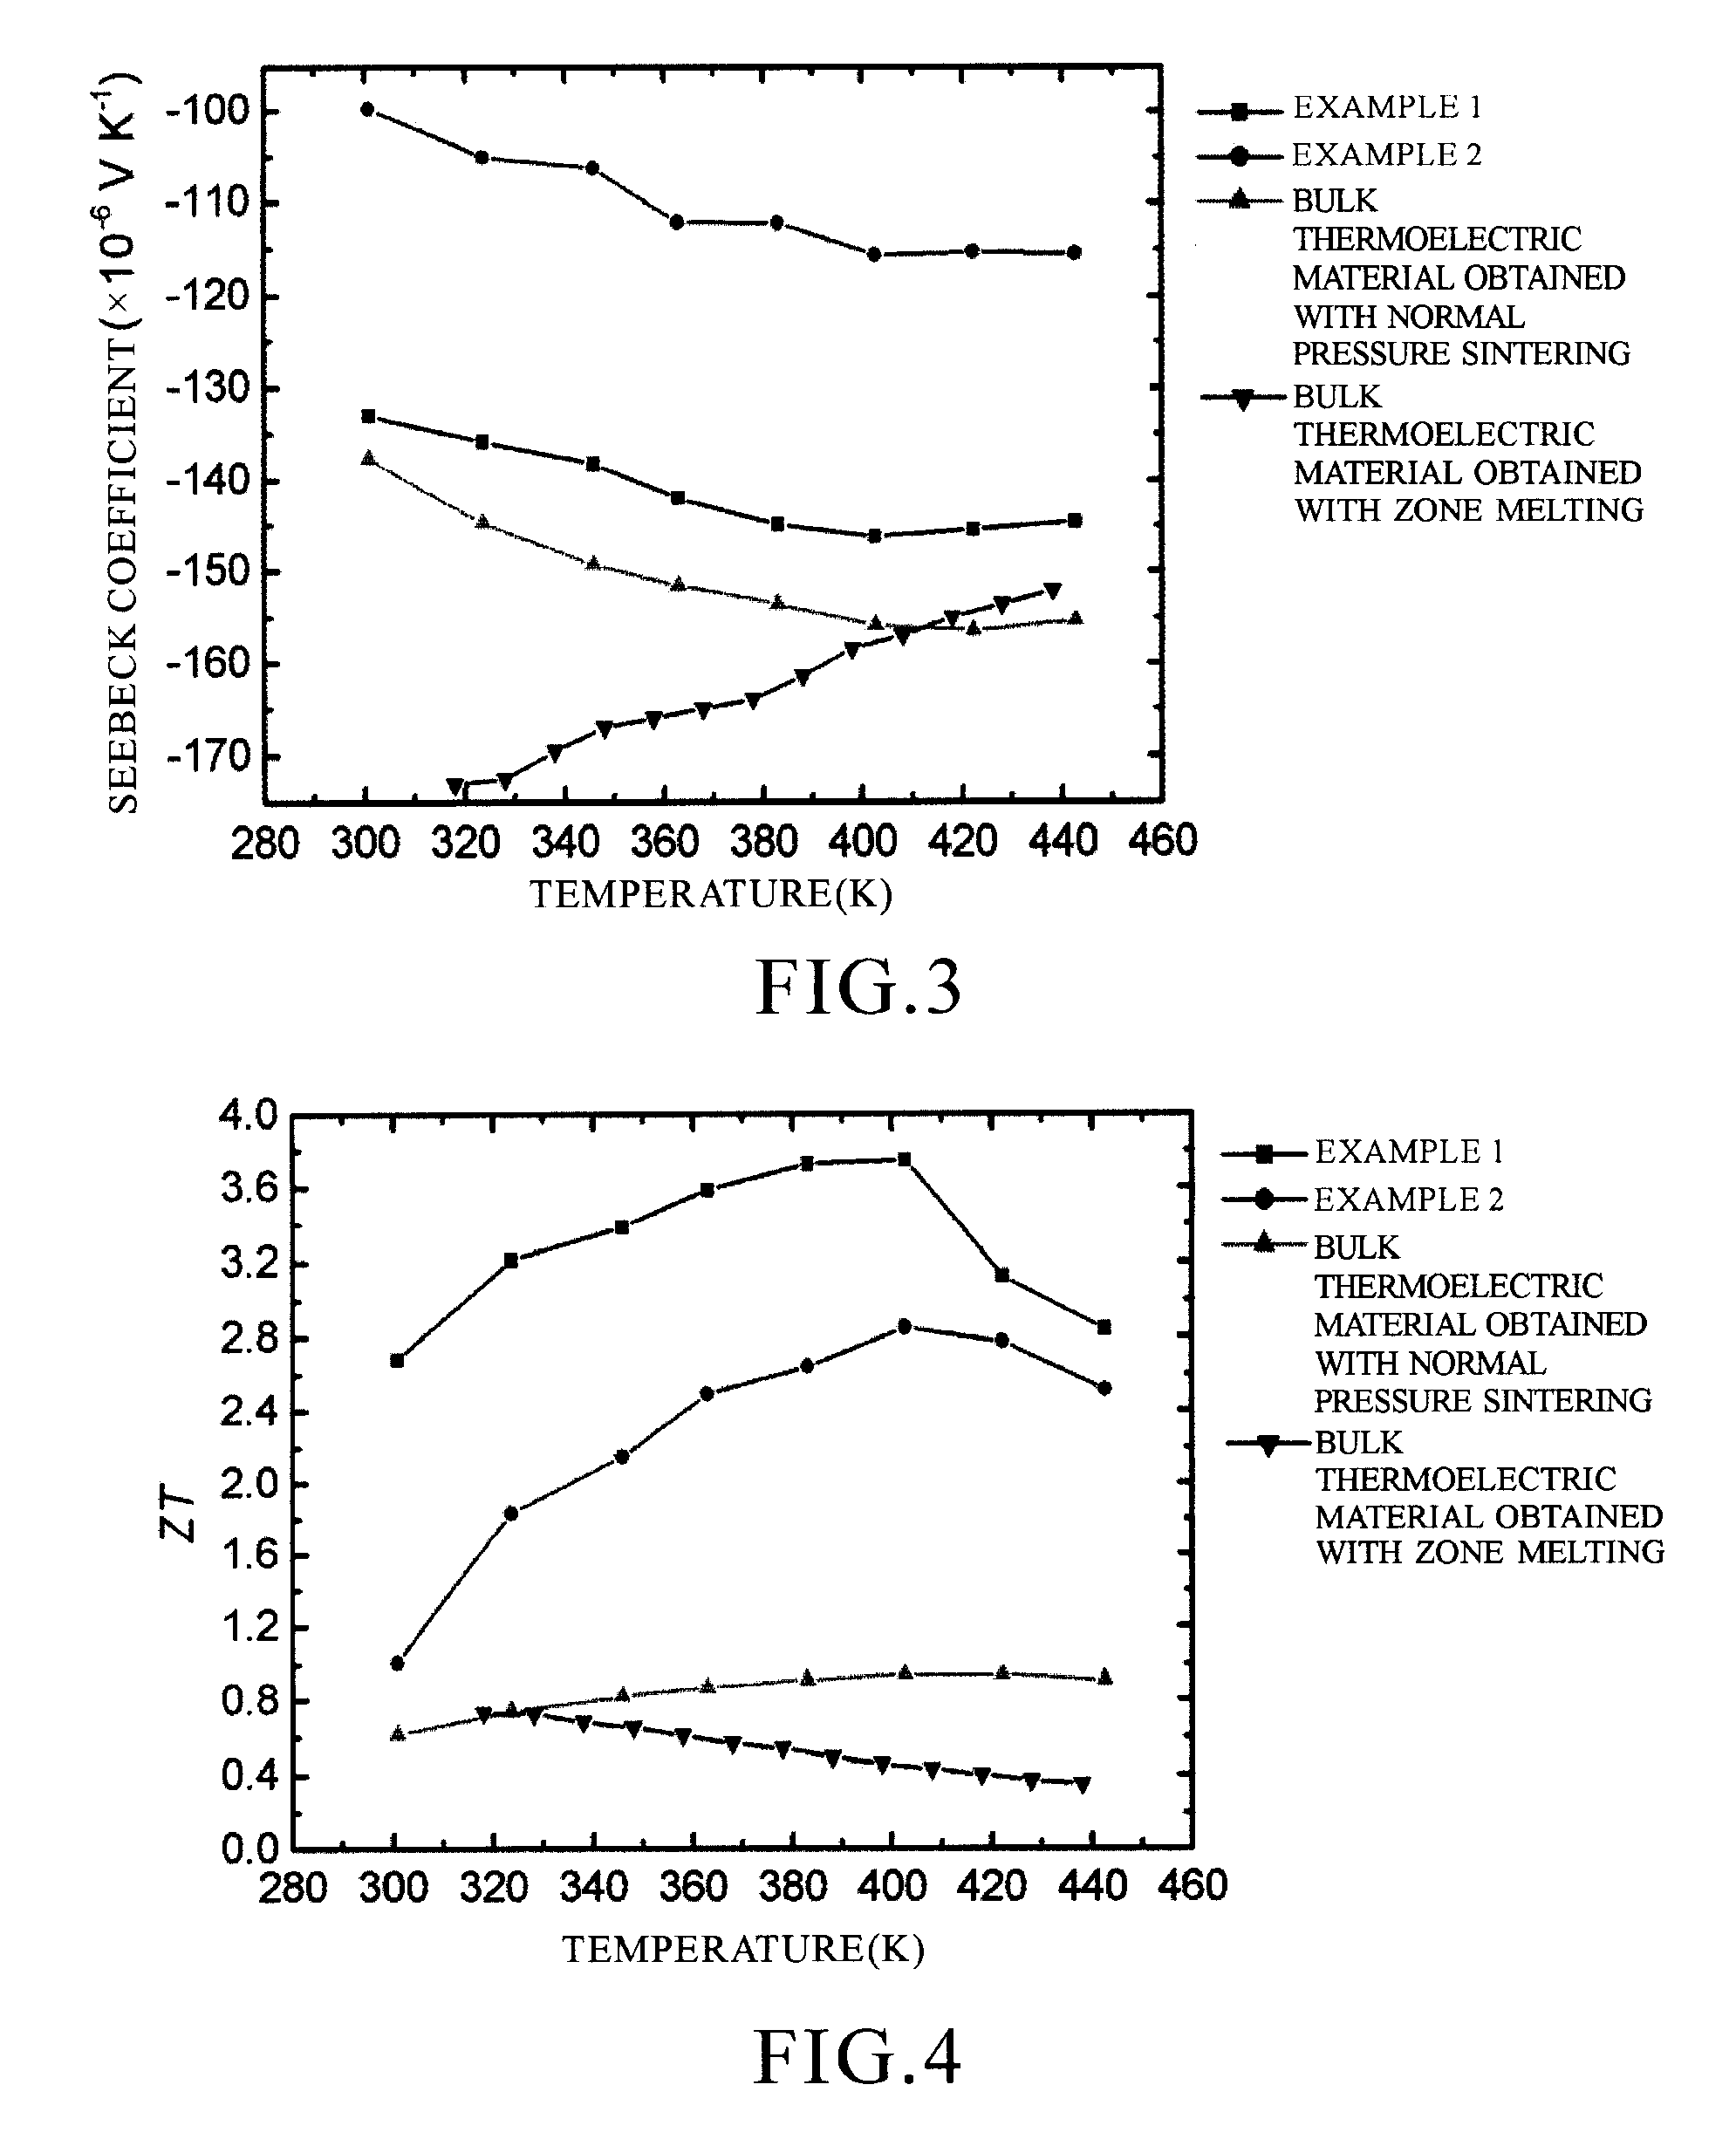 Fabrication of High Performance Densified Nanocrystalline Bulk Thermoelectric Materials Using High Pressure Sintering Technique